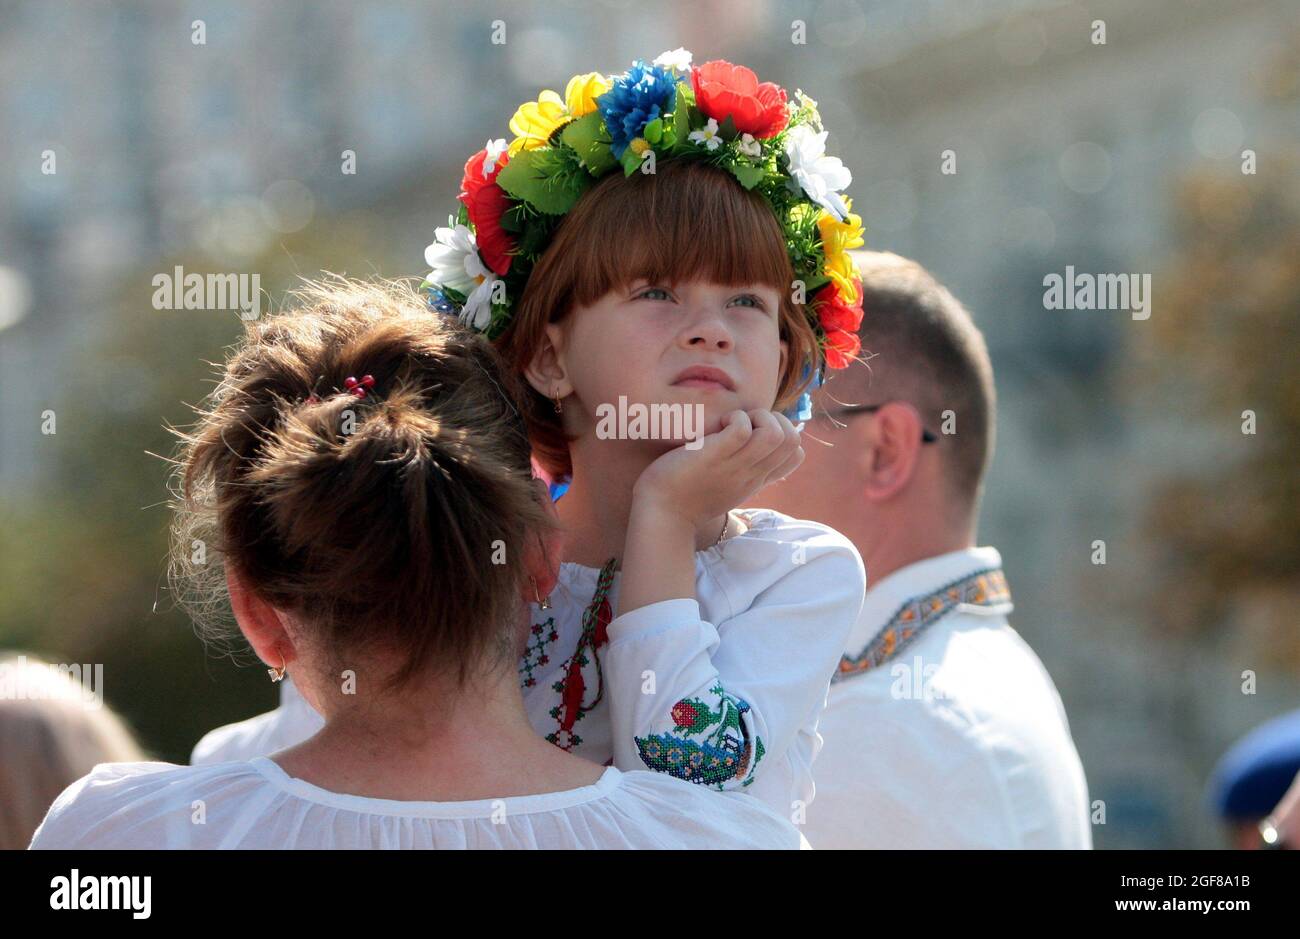 KYIV, UKRAINE - AUGUST 24, 2021 - A woman holds a girl in a floral crown and a vyshyvanka during the 30th Independence Day celebration in central Kyiv Stock Photo